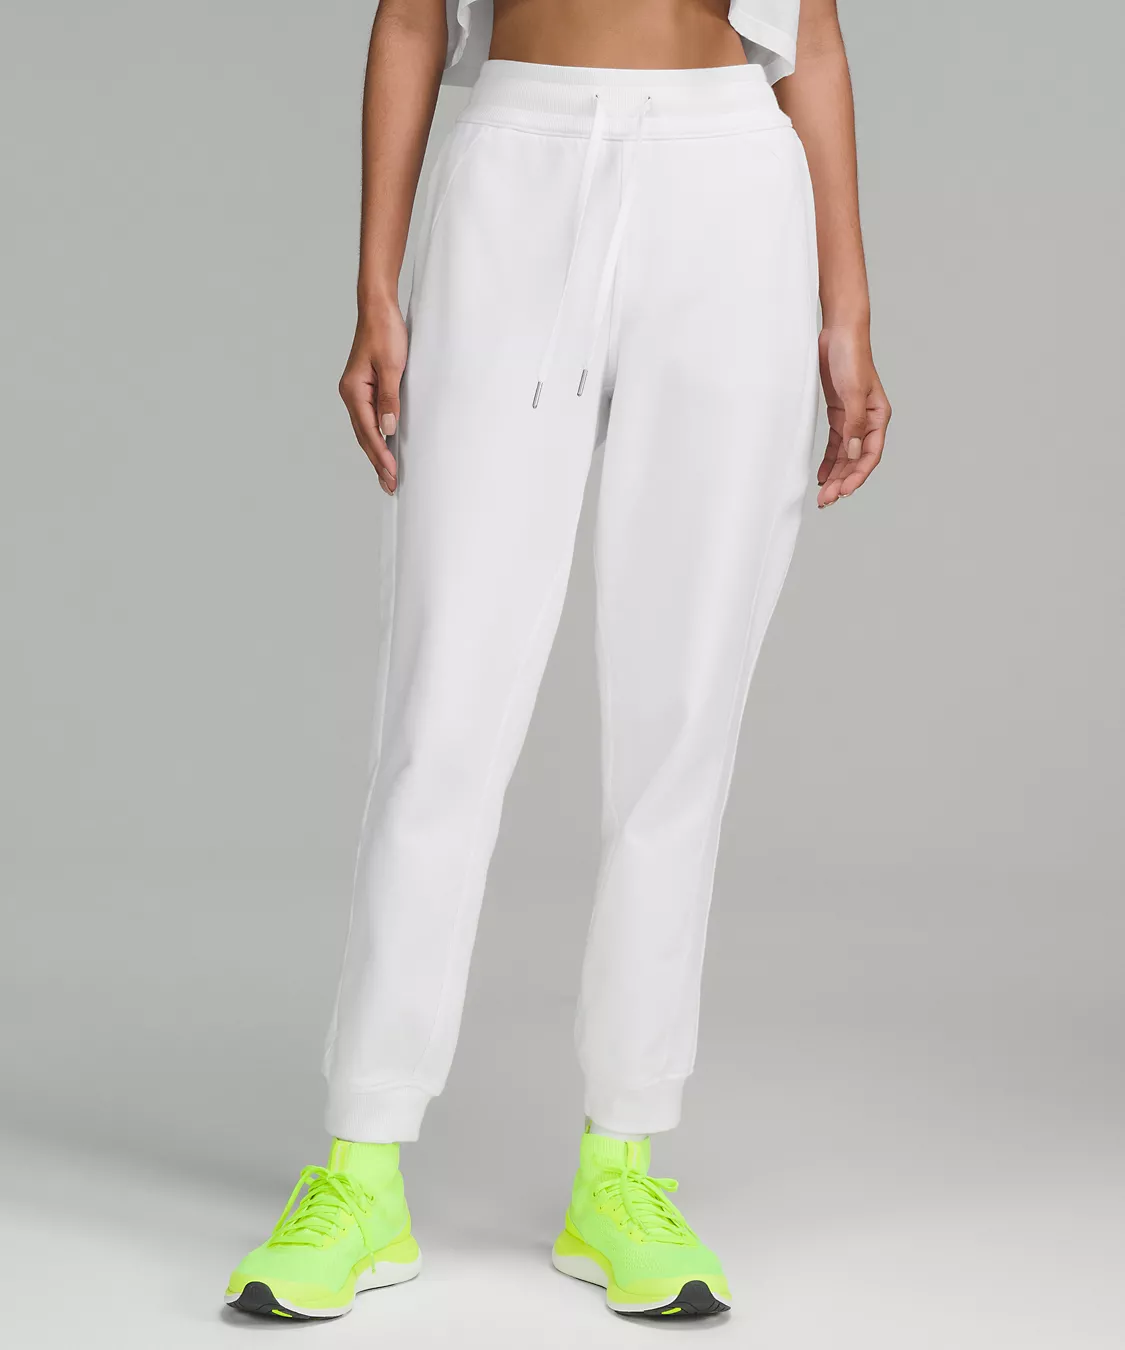 shop.lululemon.com | Scuba High-Rise French Terry Jogger Online Only